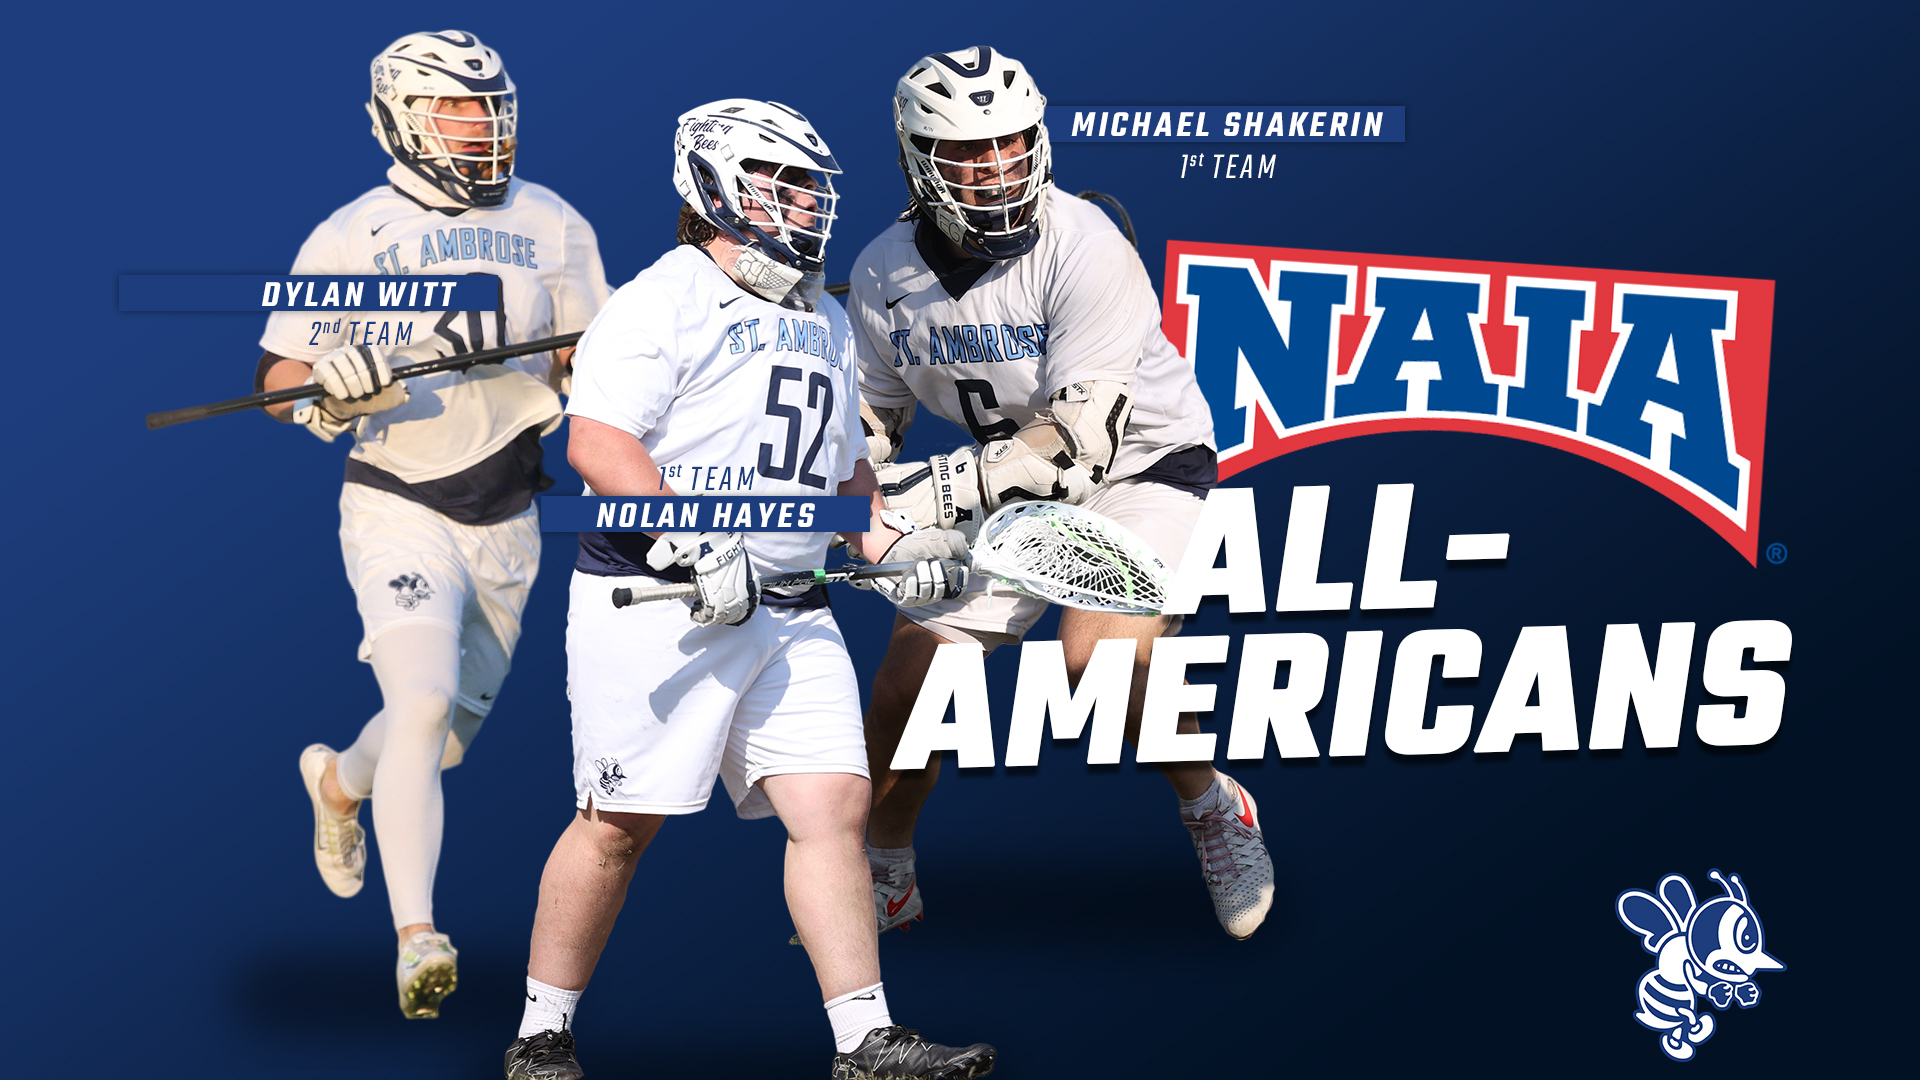 Hayes, Shakerin named 1st team All-Americans; Witt on 2nd team